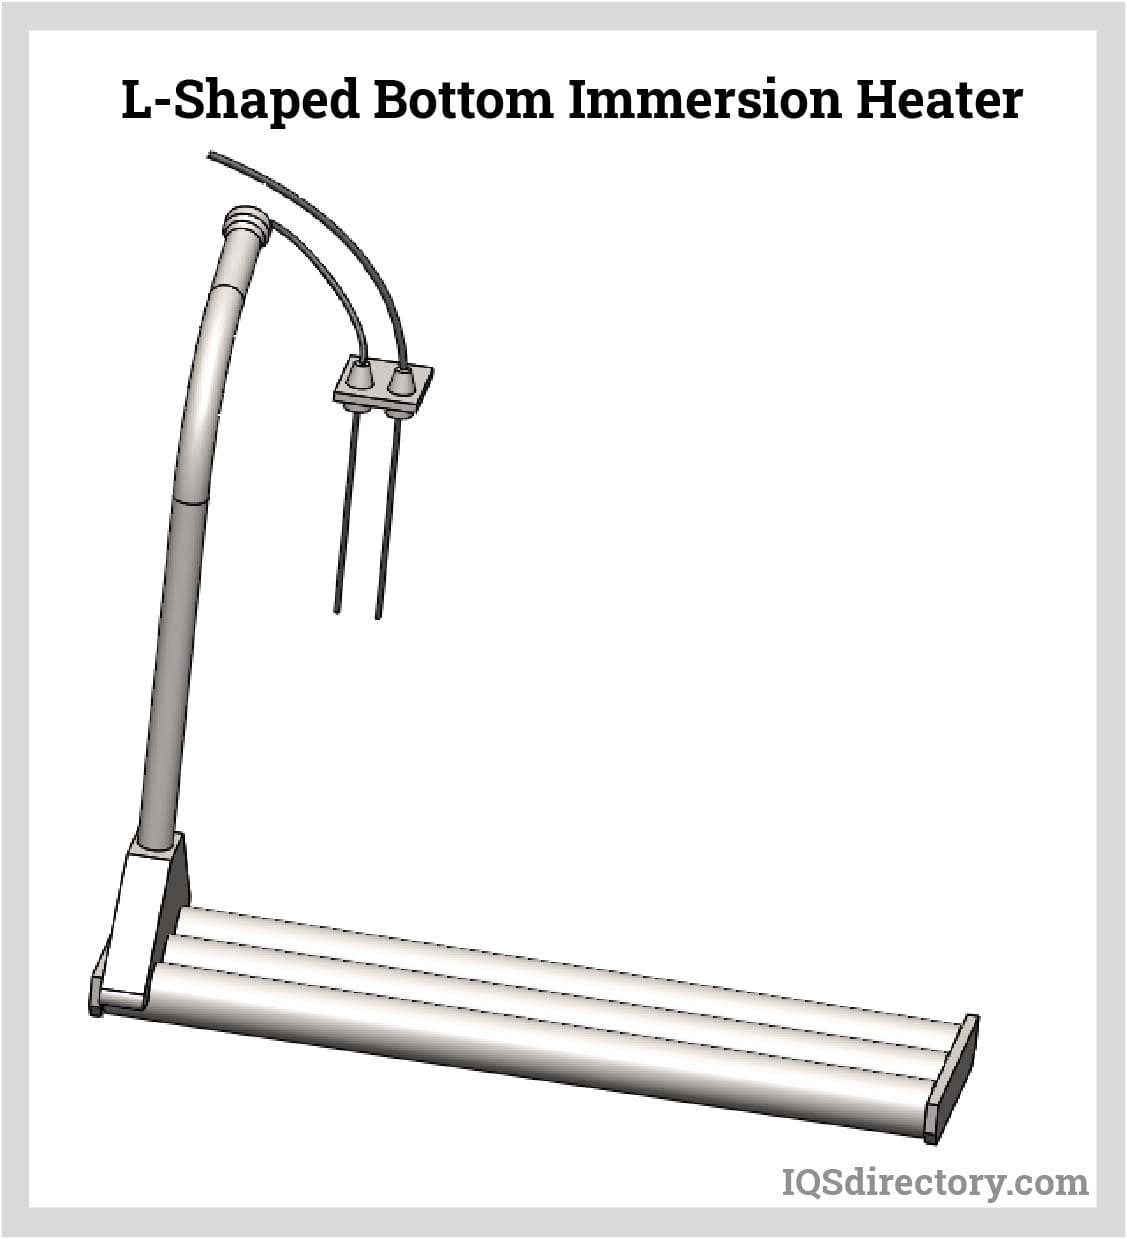 L-Shaped Bottom Immersion Heater